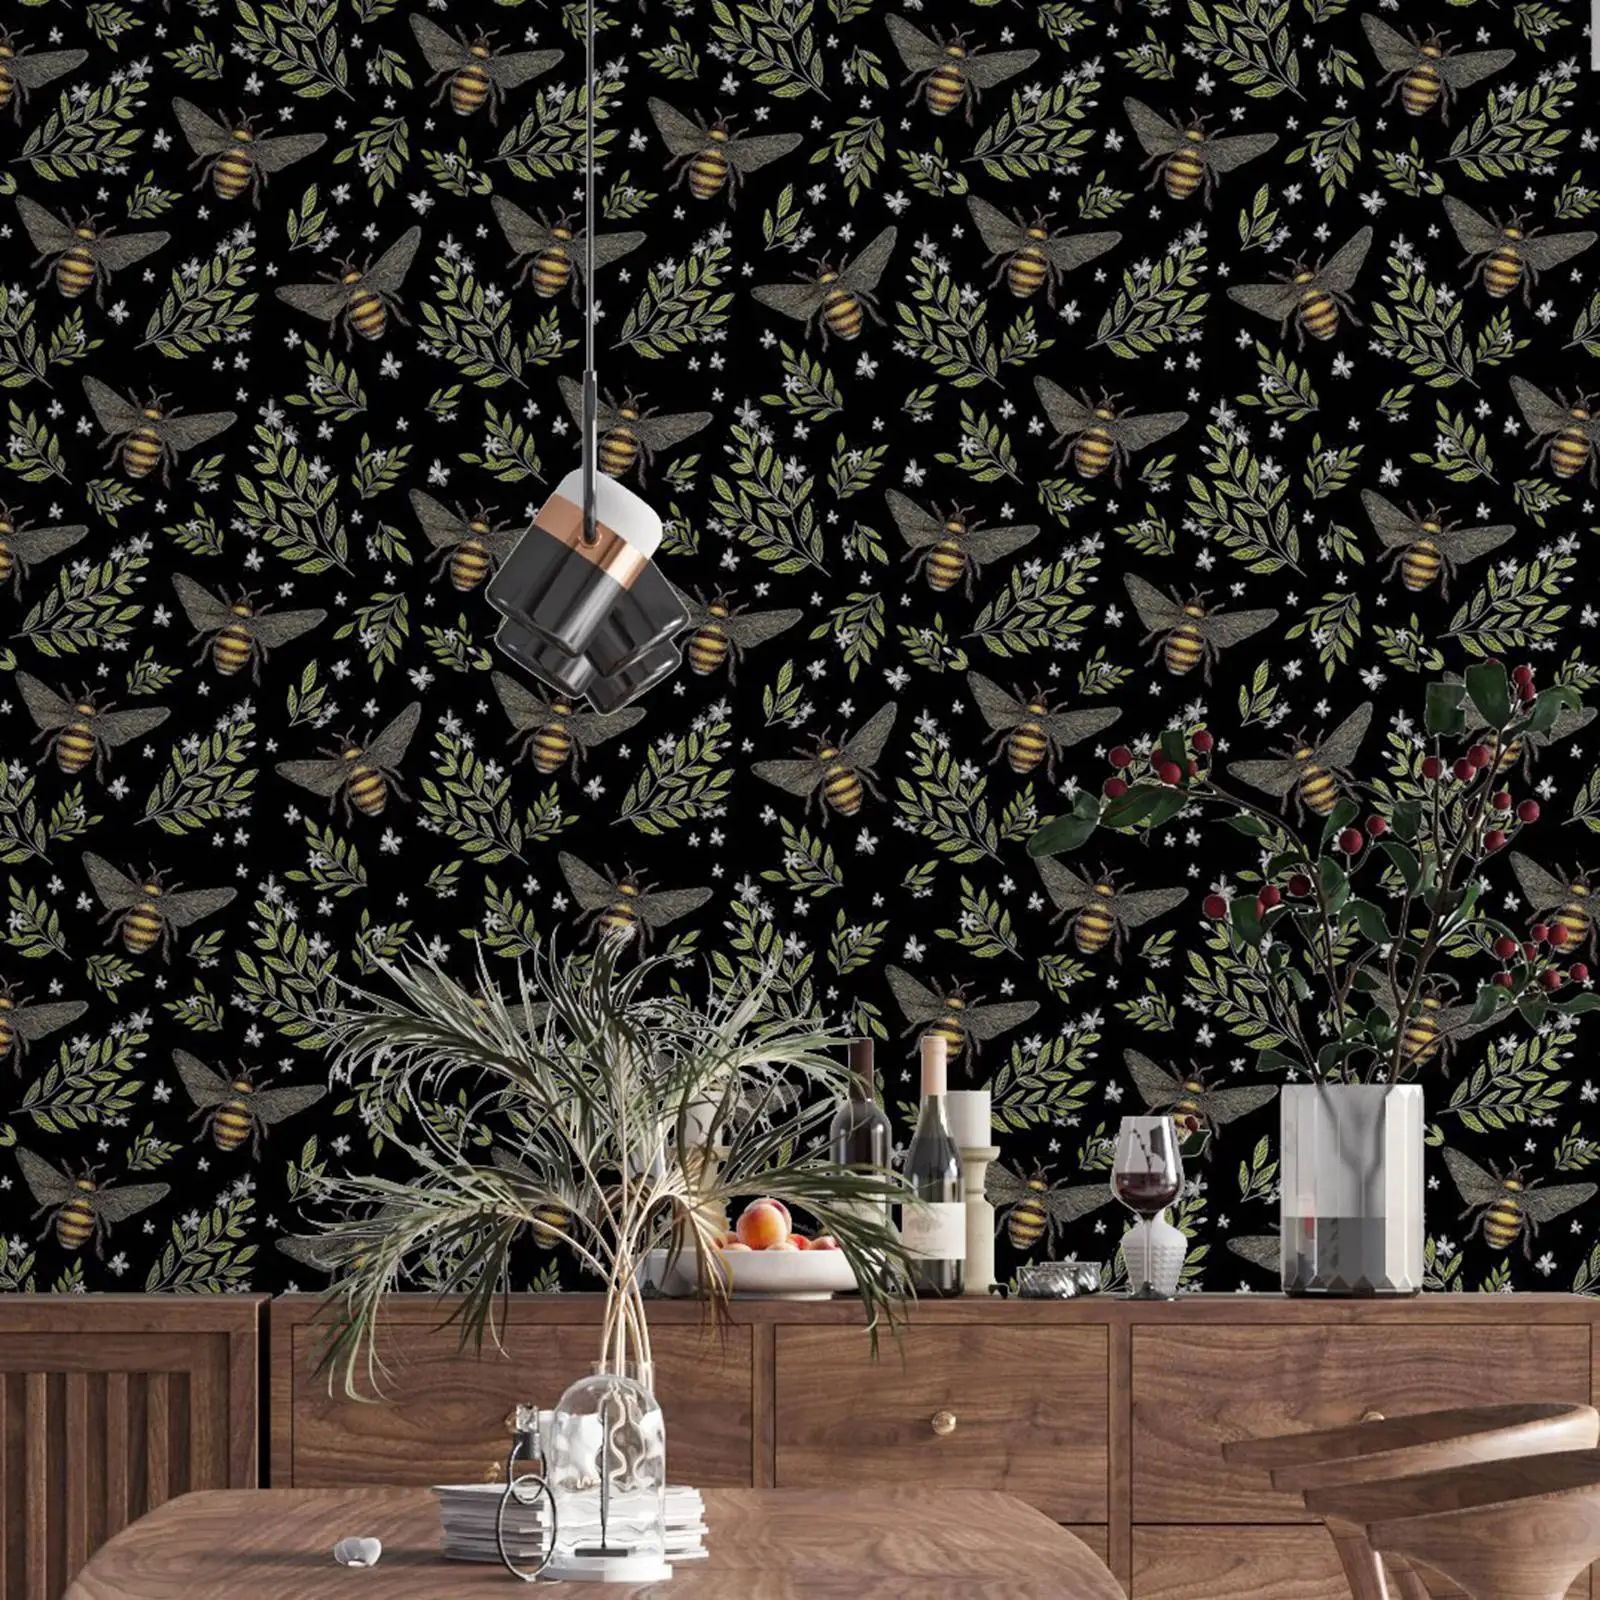 Spring Bee Removable Wallpaper in Midnight Black, Honey Bee Wall Paper in black back ground for living room bedroom HB0624001